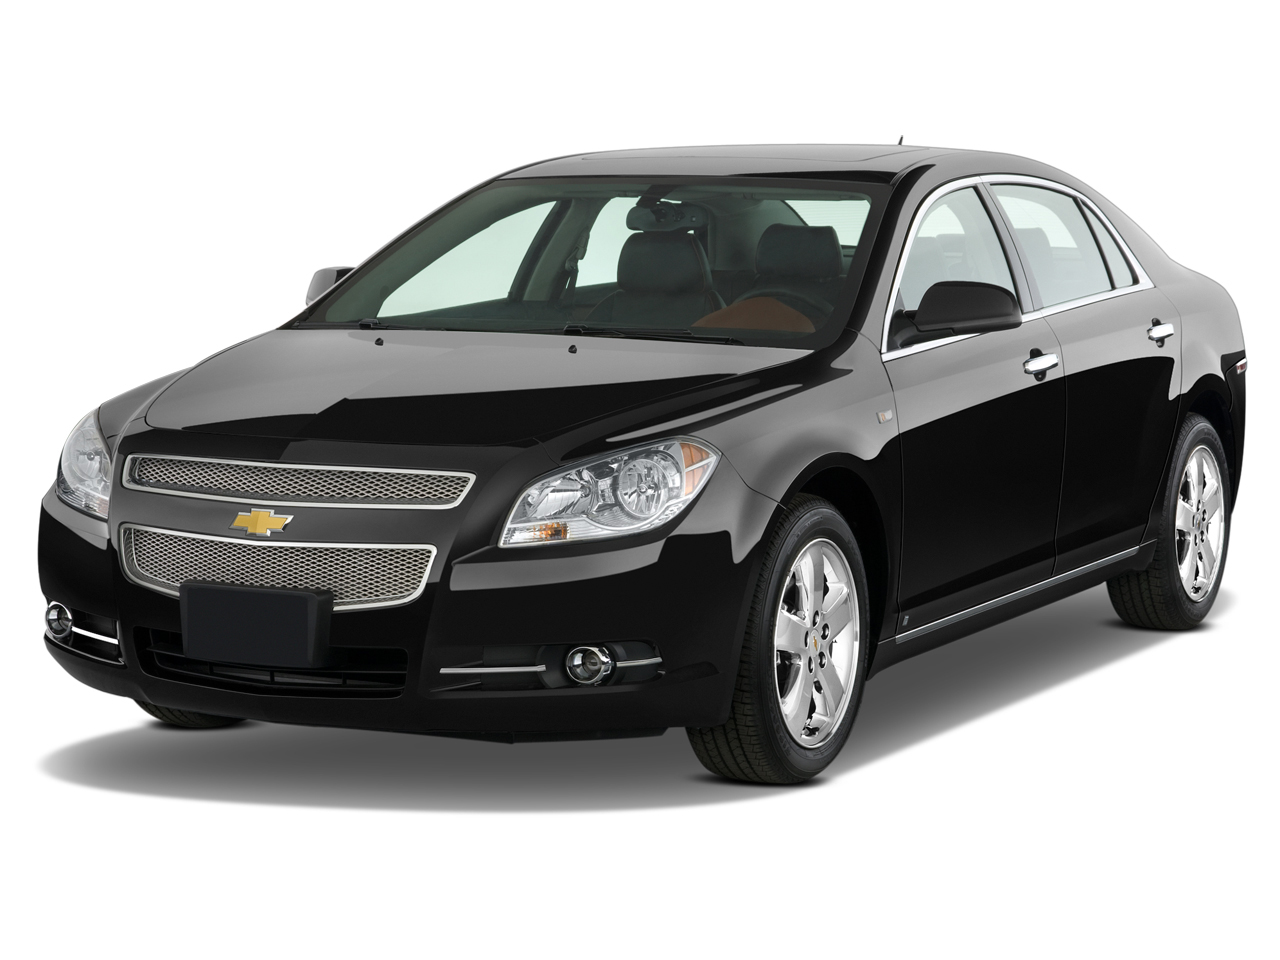 2012 Chevrolet Malibu (Chevy) Gas Mileage The Car Connection